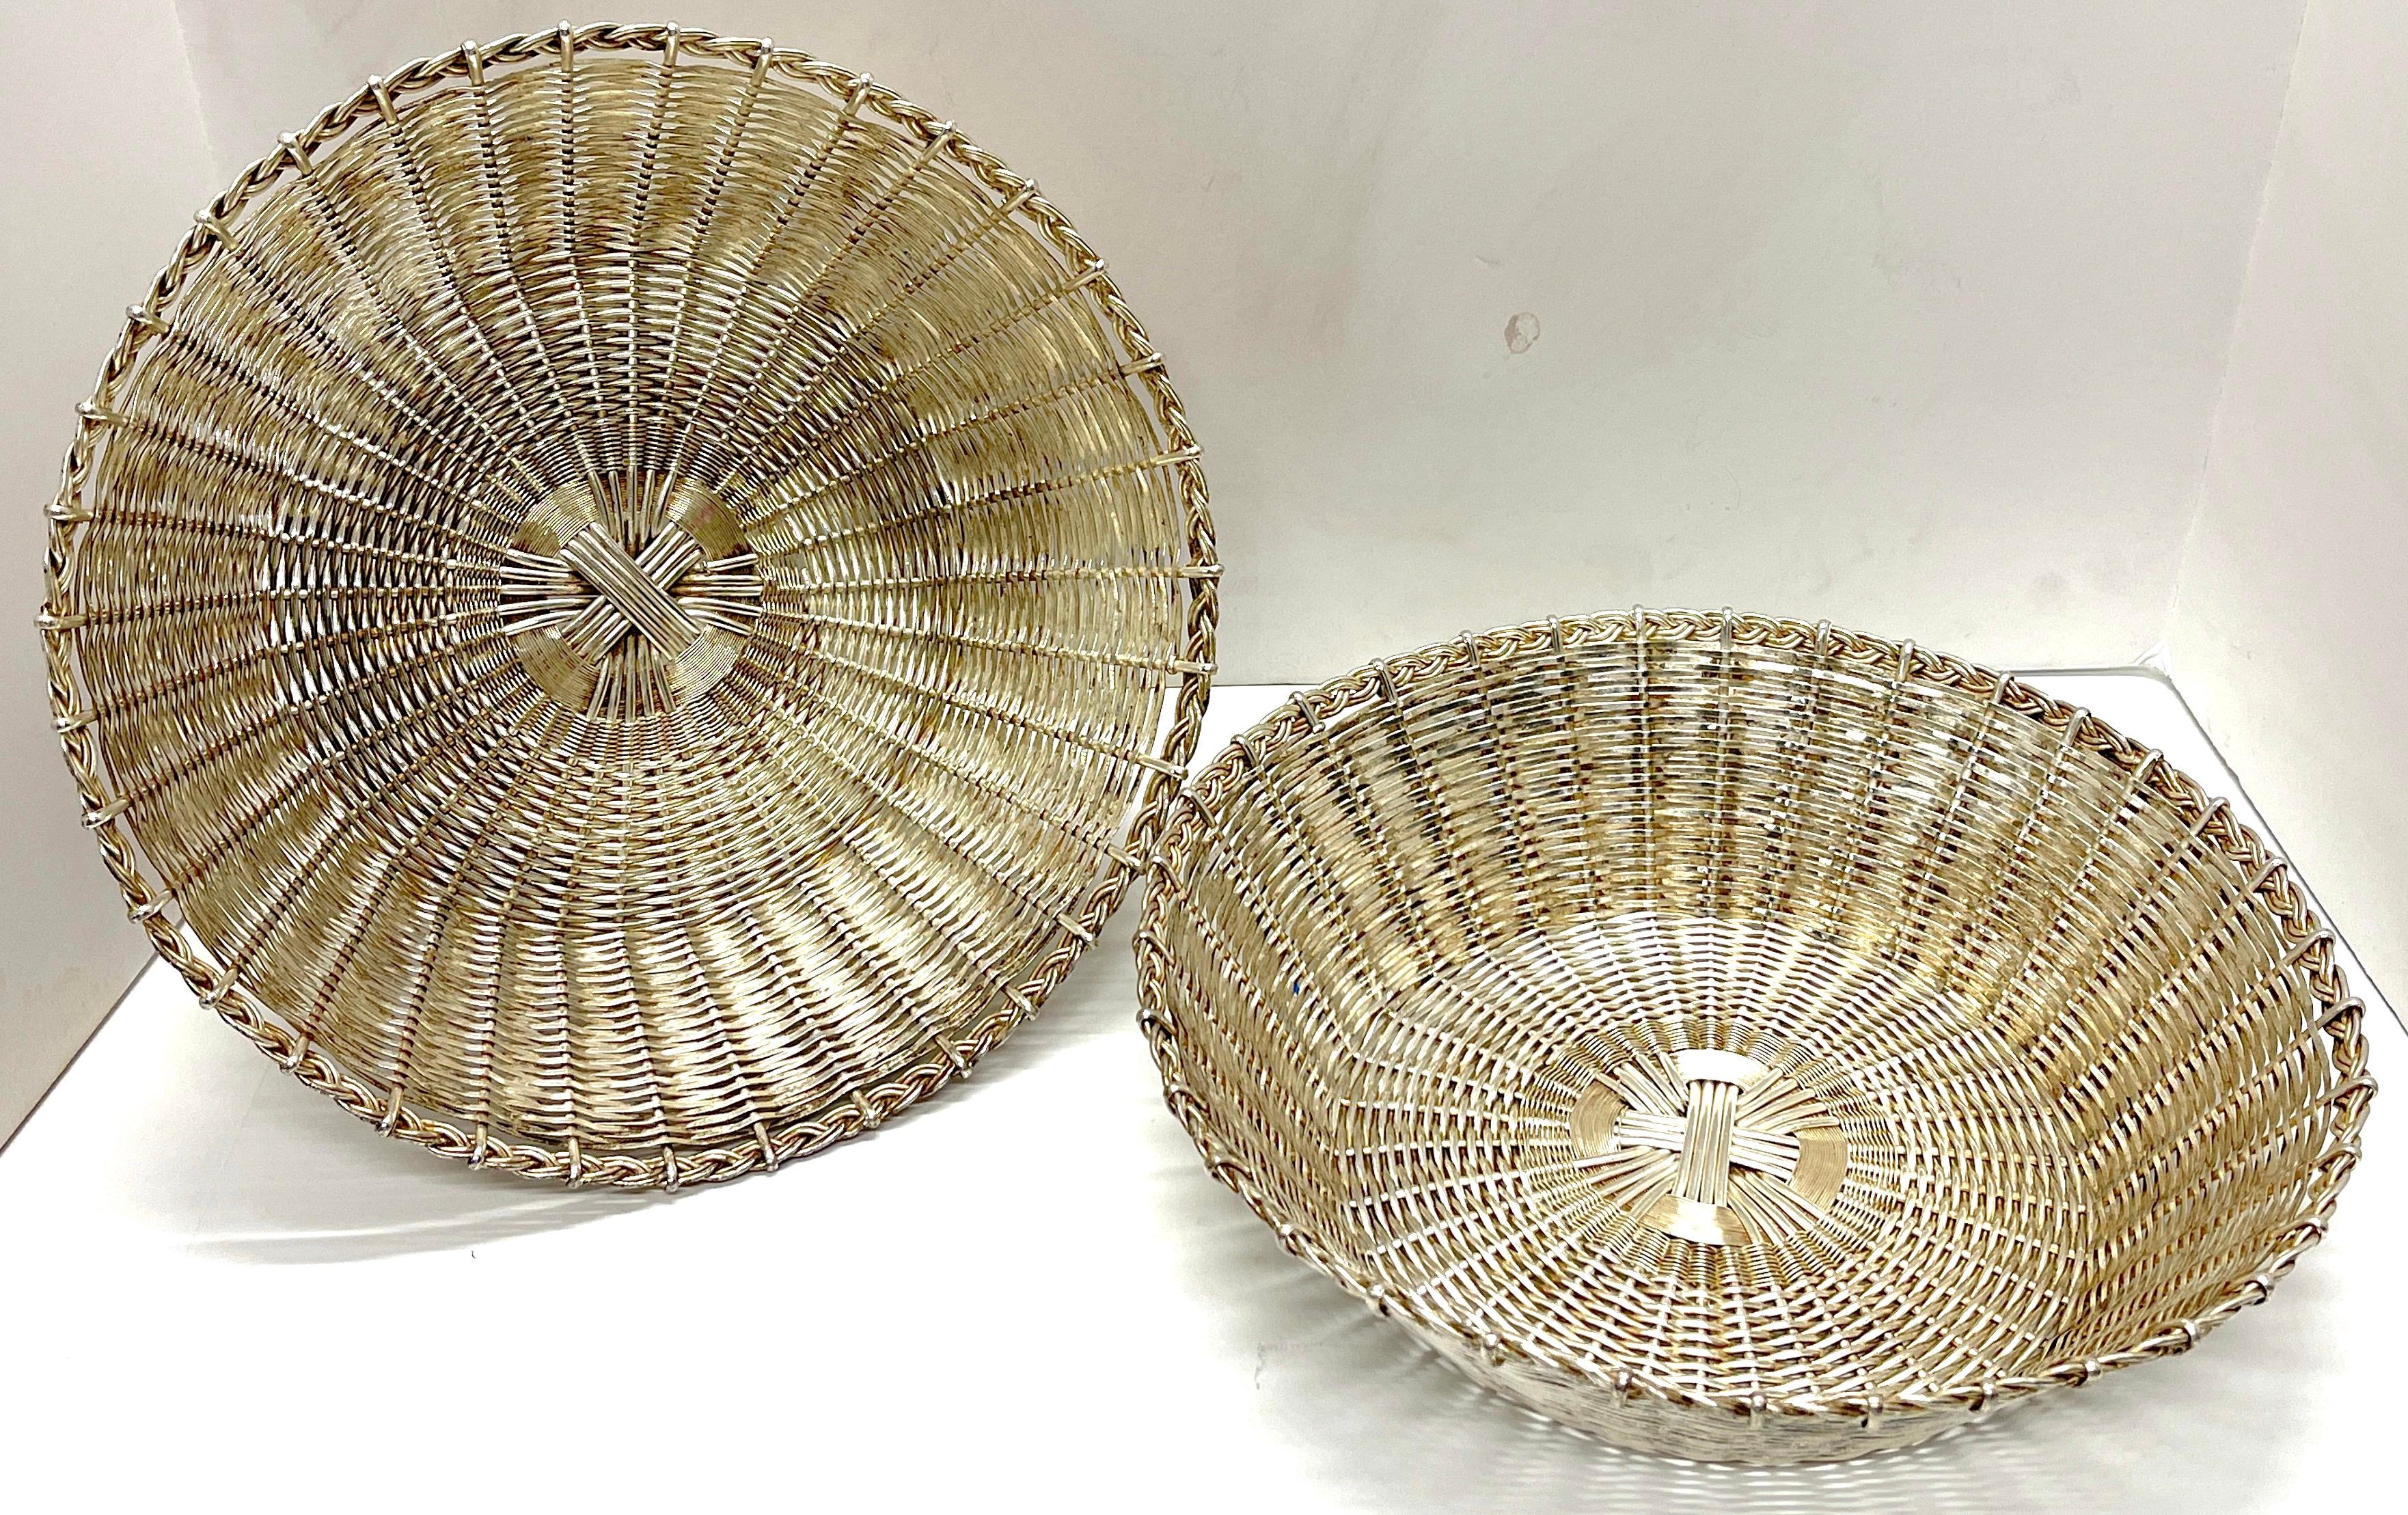 Pair of Christofle ( Atrib.) Silverplated woven baskets, each one of circular form with hundreds of woven silverplated hand-woven strands. Unmarked.
Each basket has a 12